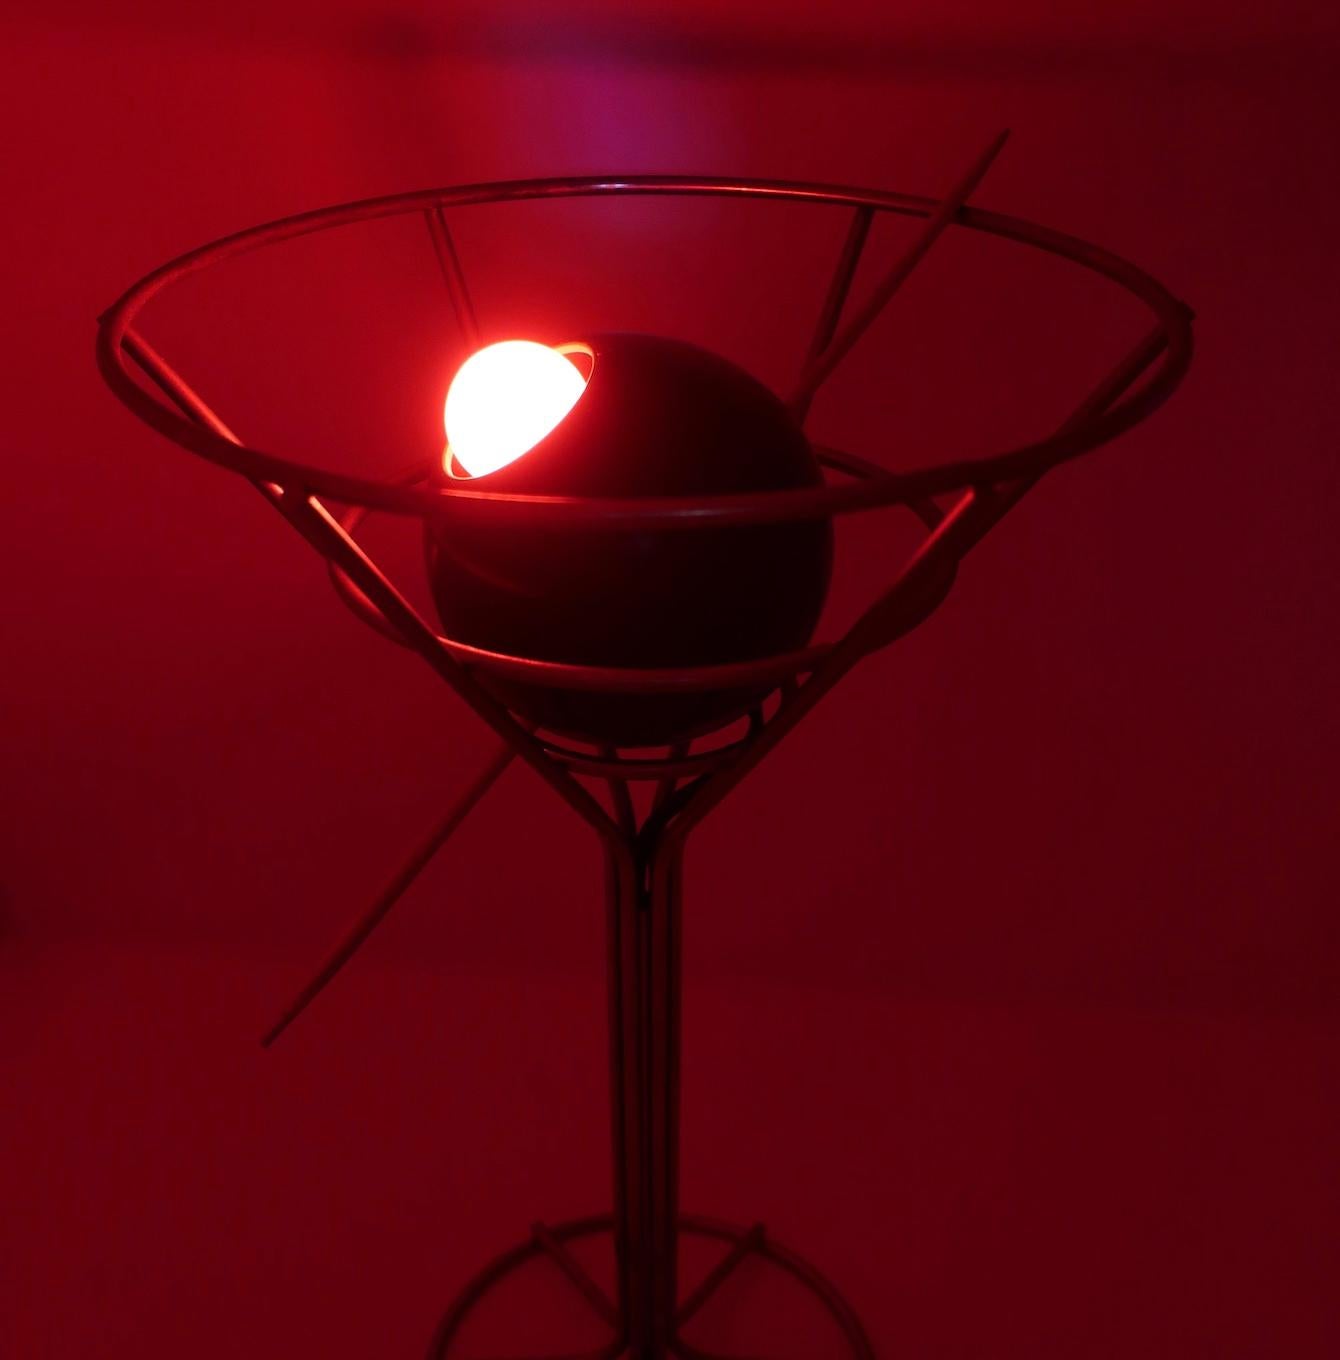 A rare 1993 postmodern martini lamp designed by David Krys. Metal wire forms the glass' shape with a skewered green olive stuffed with a red light bulb disguised as a pimento. Great for lovers of pop art, barware, martinis, or awesome lamps!

In